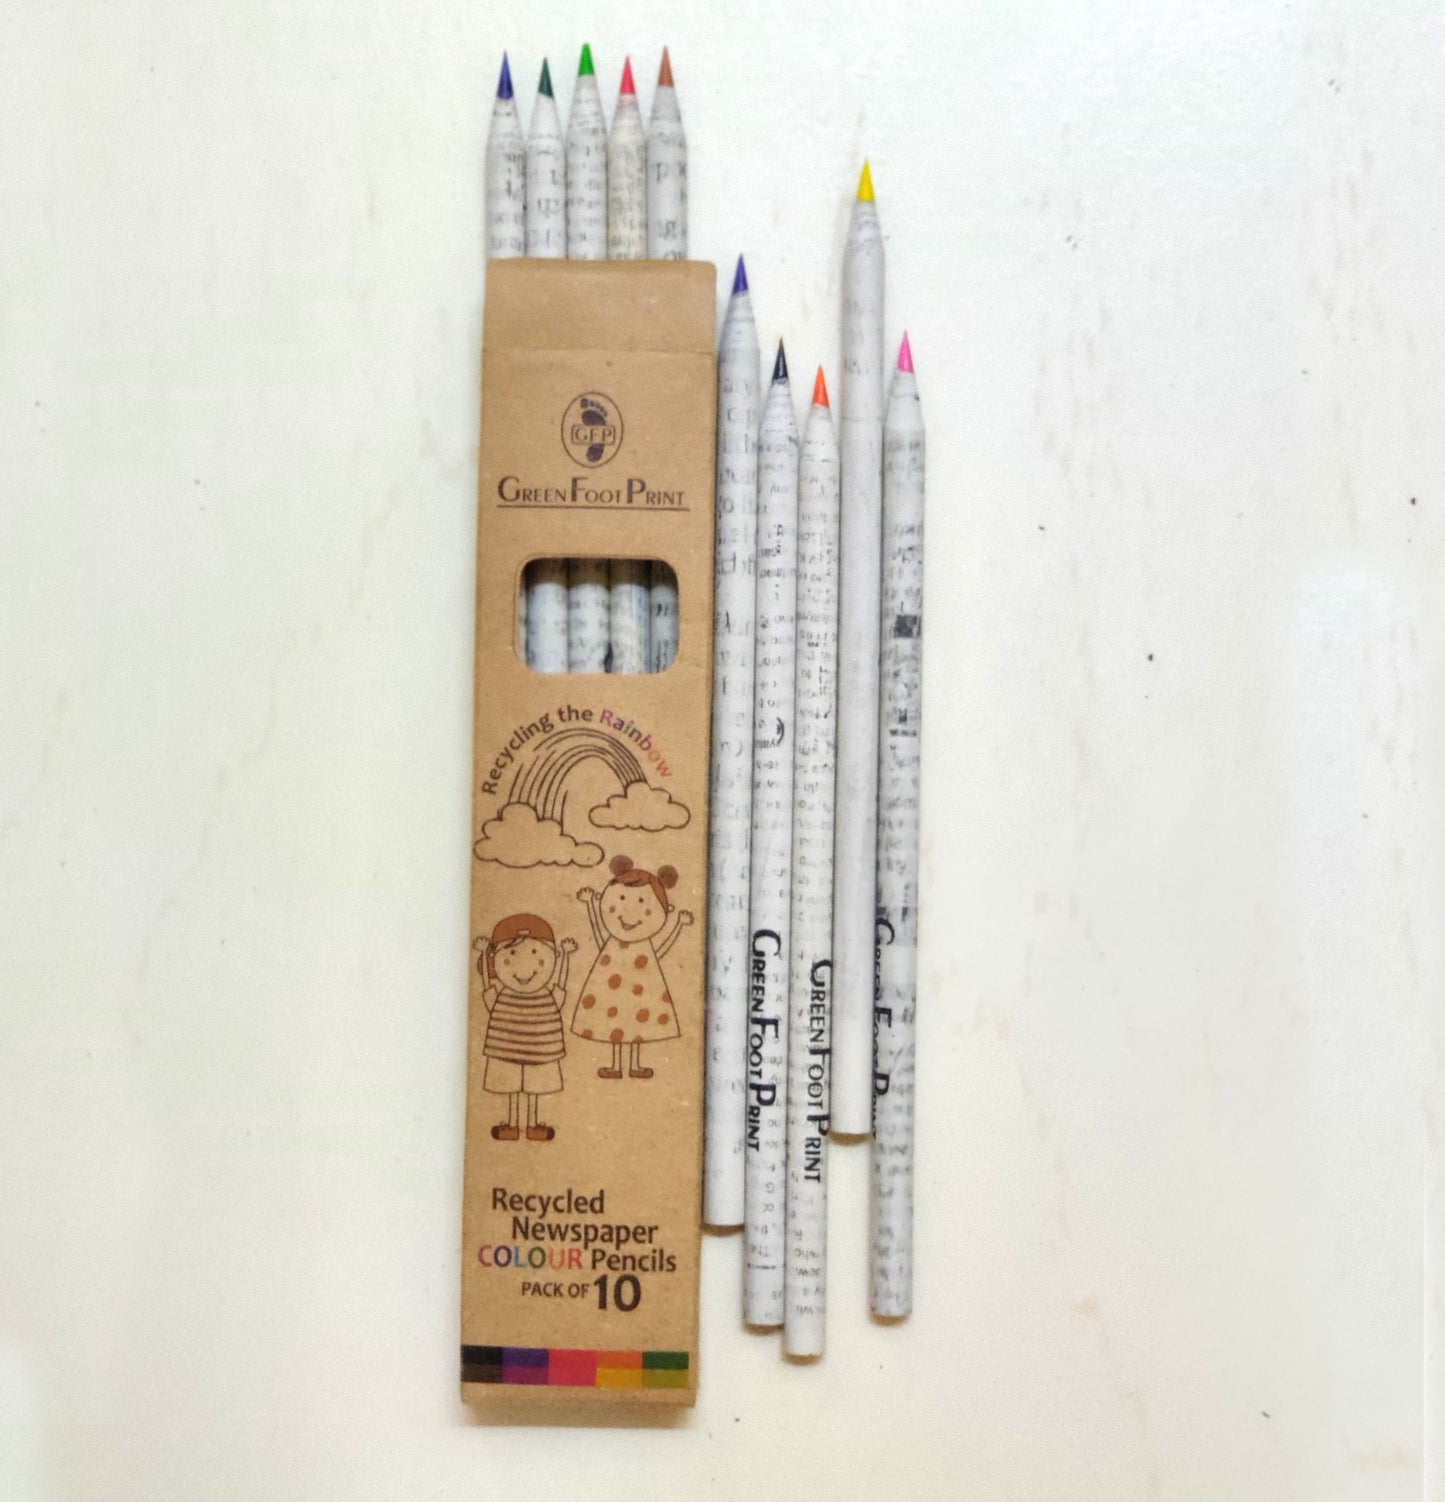 Recycled News Paper COLOUR Pencils |Pack of 10